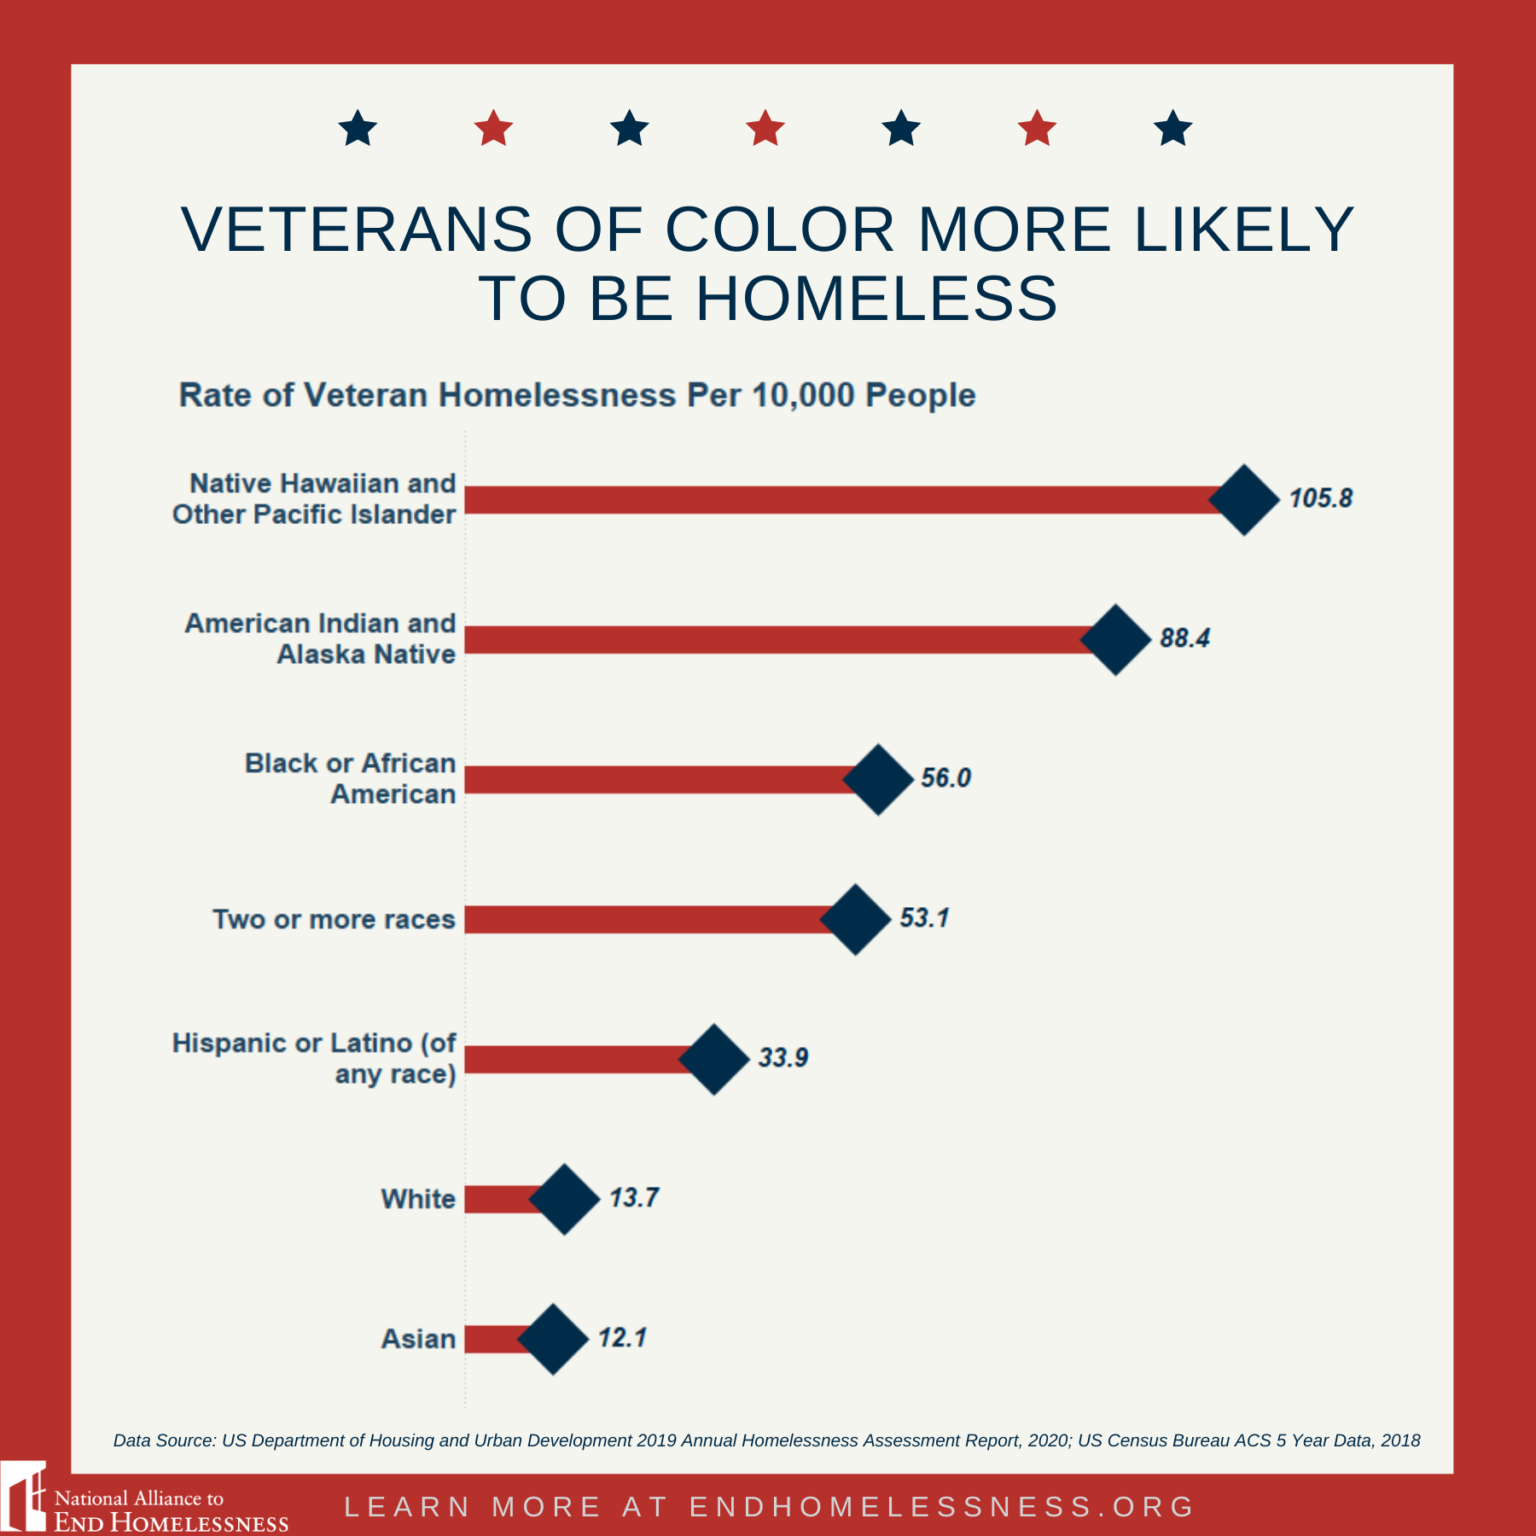 Veterans Rate Snapshot (4) National Alliance to End Homelessness